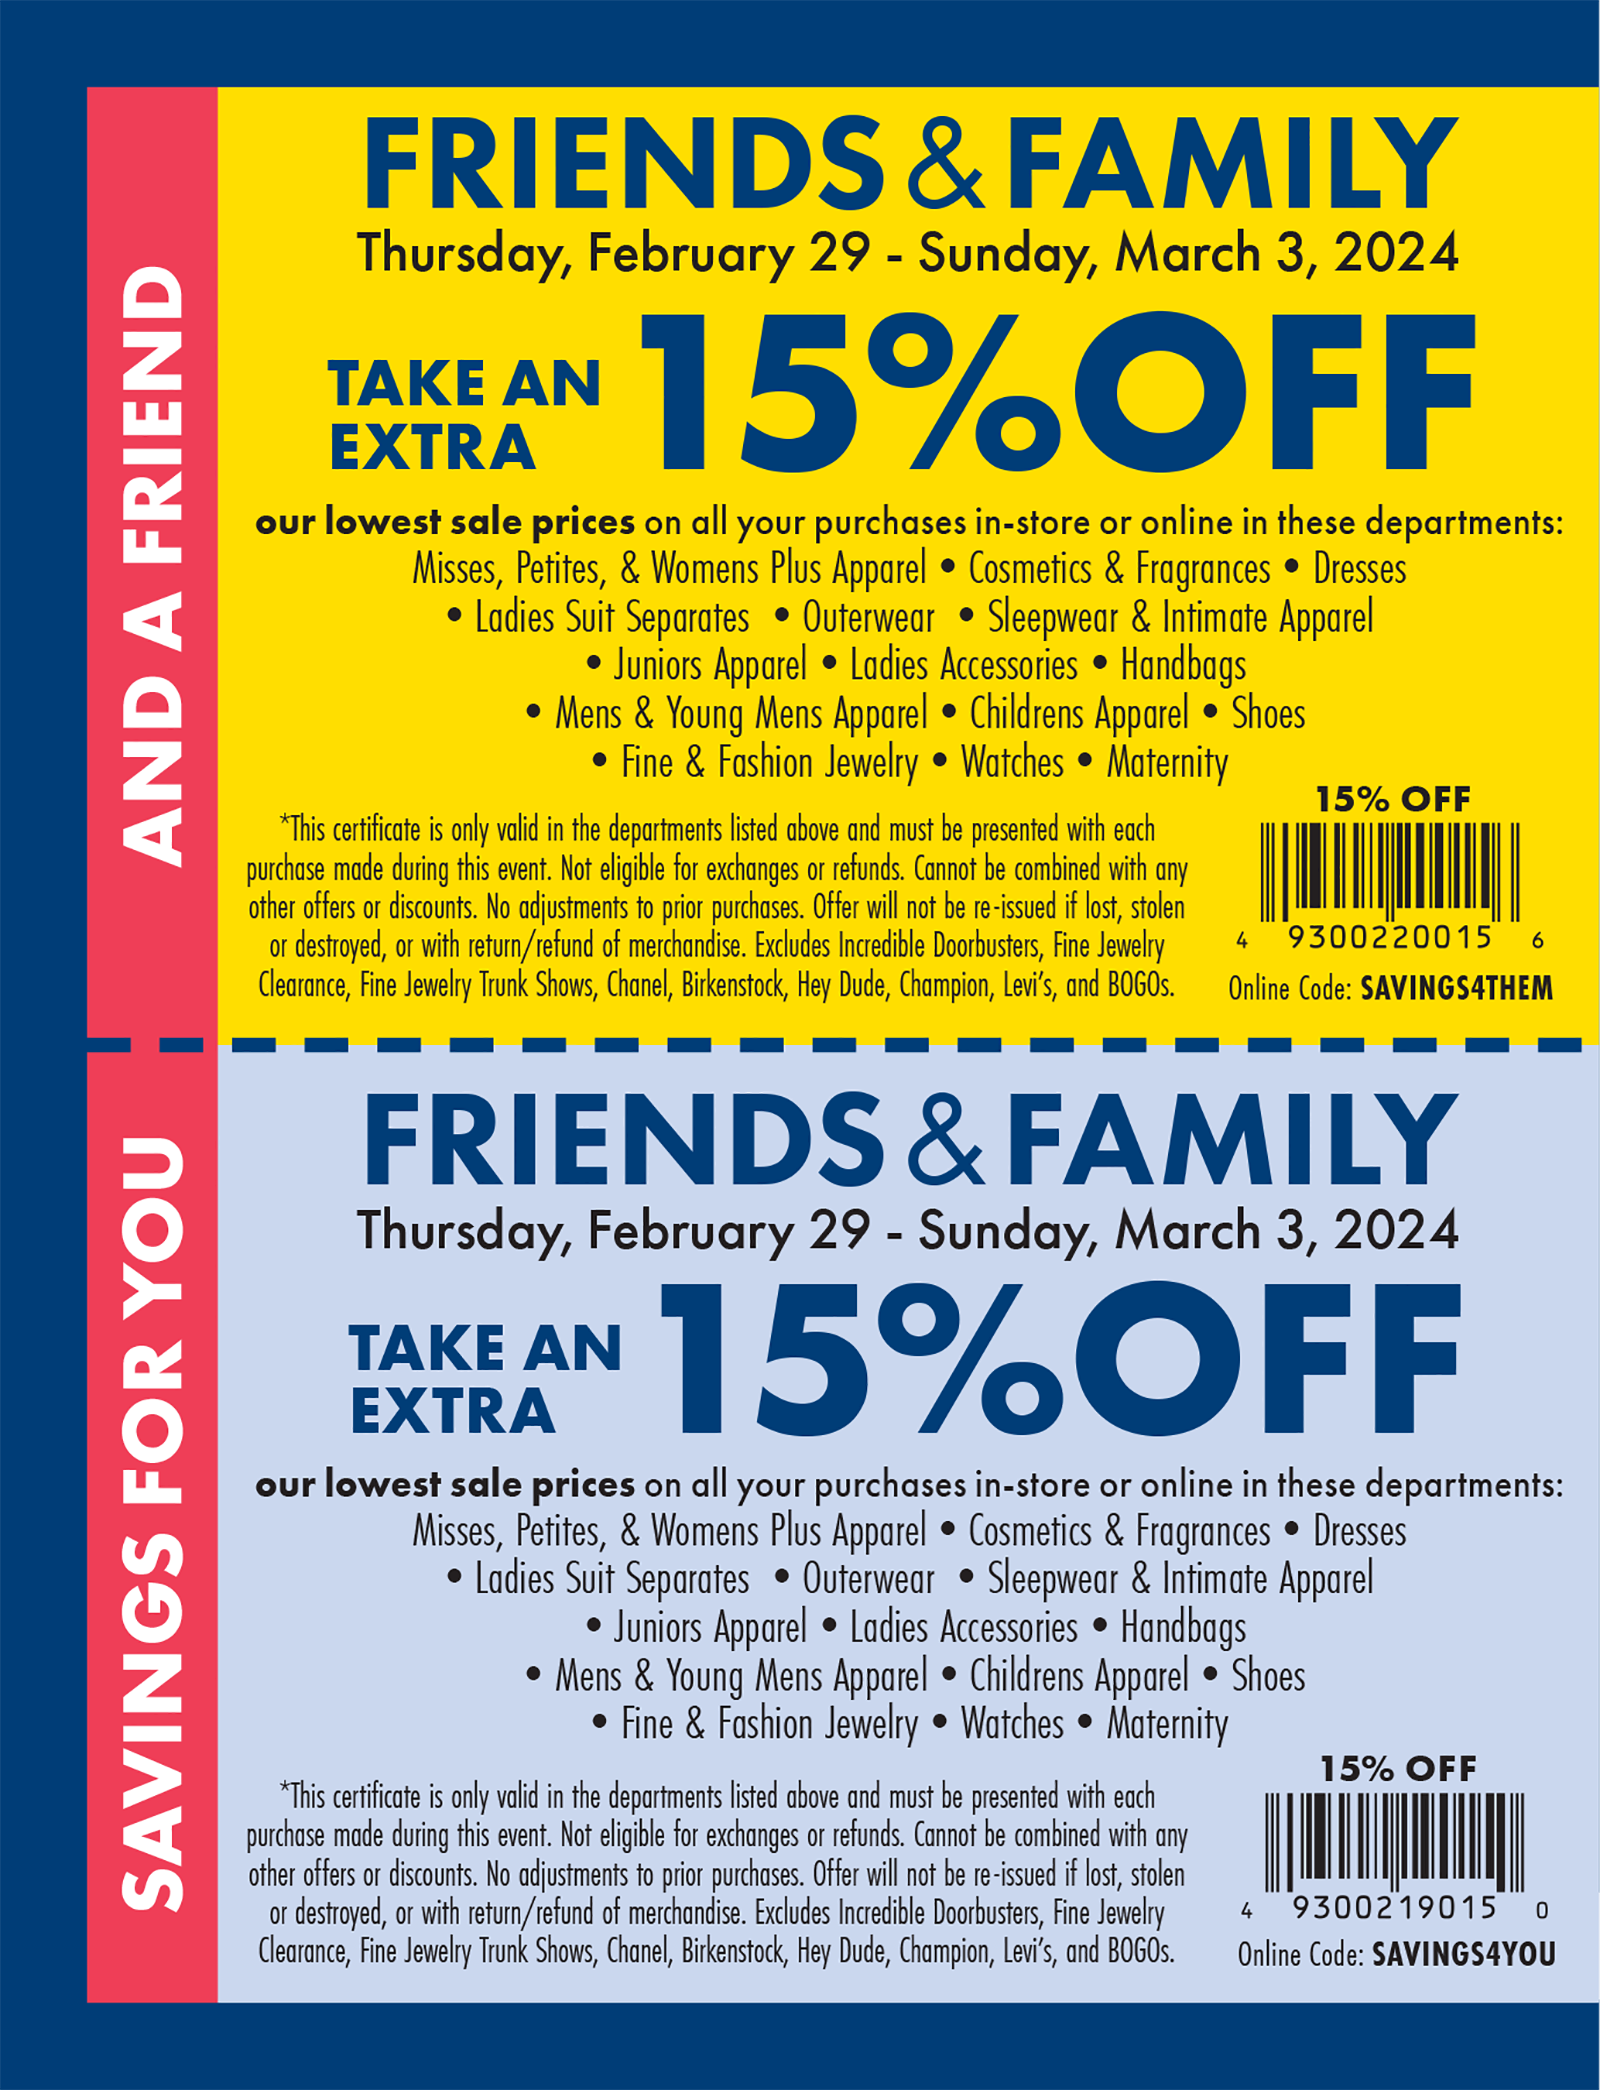 Friends & Family - Take 15% OFF